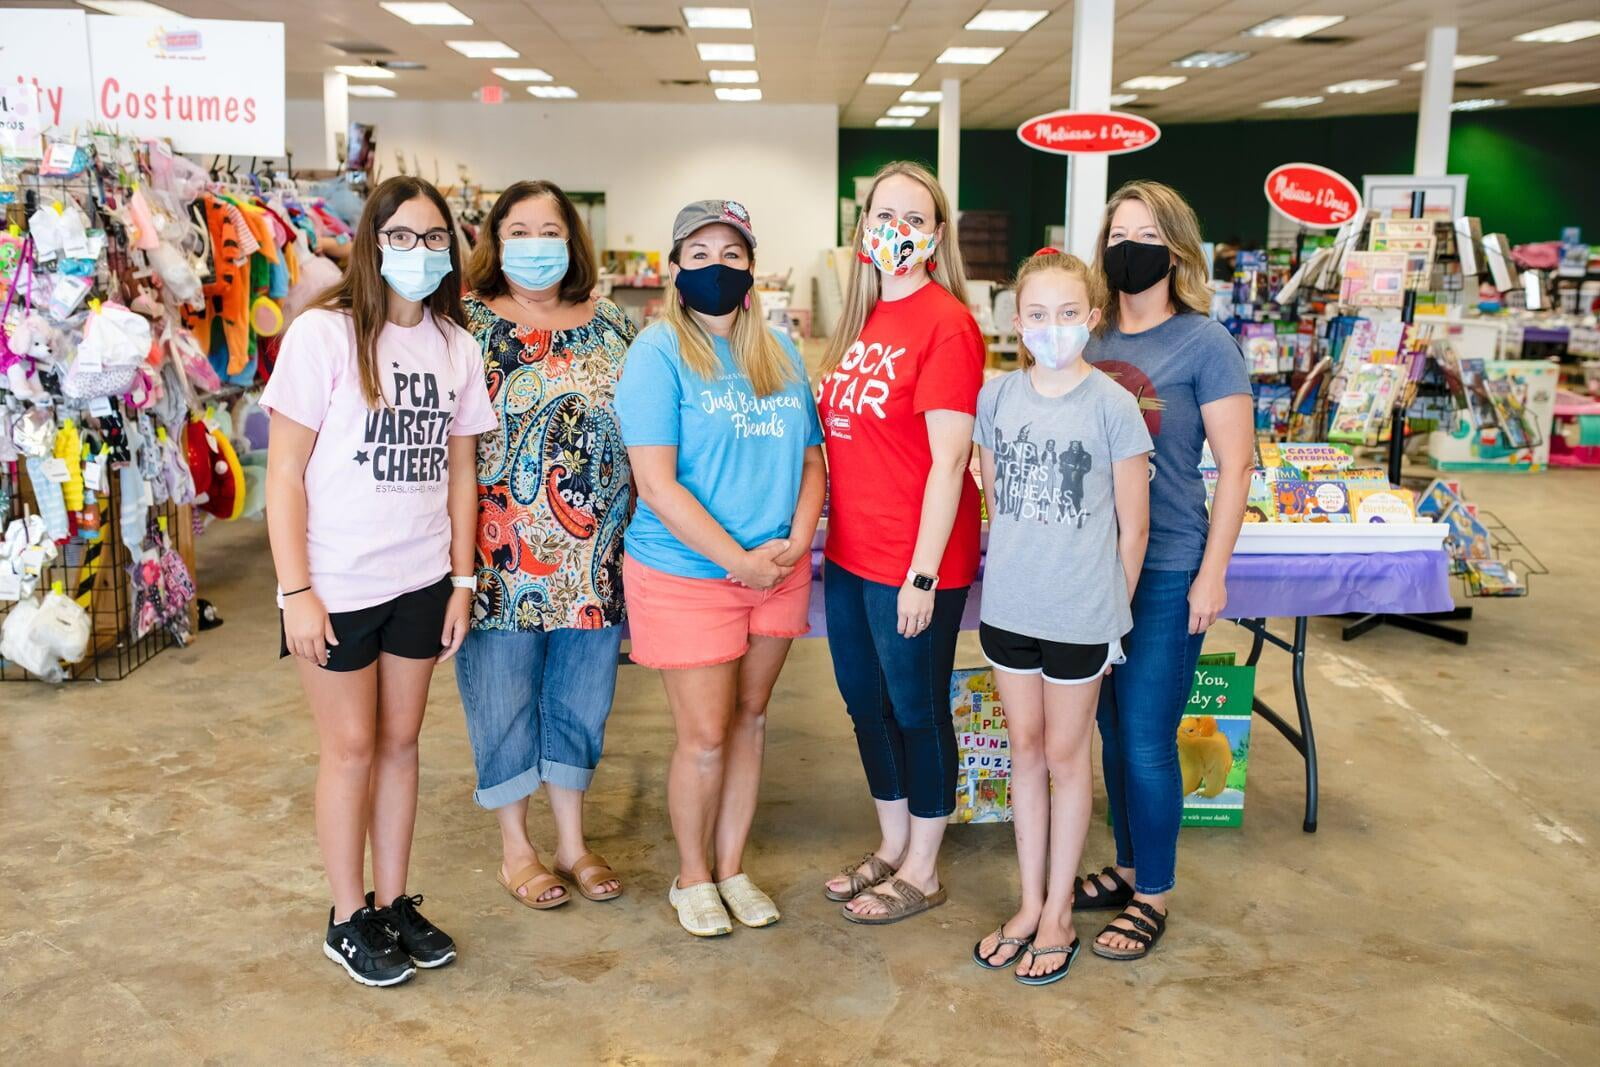 A group of shoppers wearing face masks for safety reasons gathers together at the sale to shop.